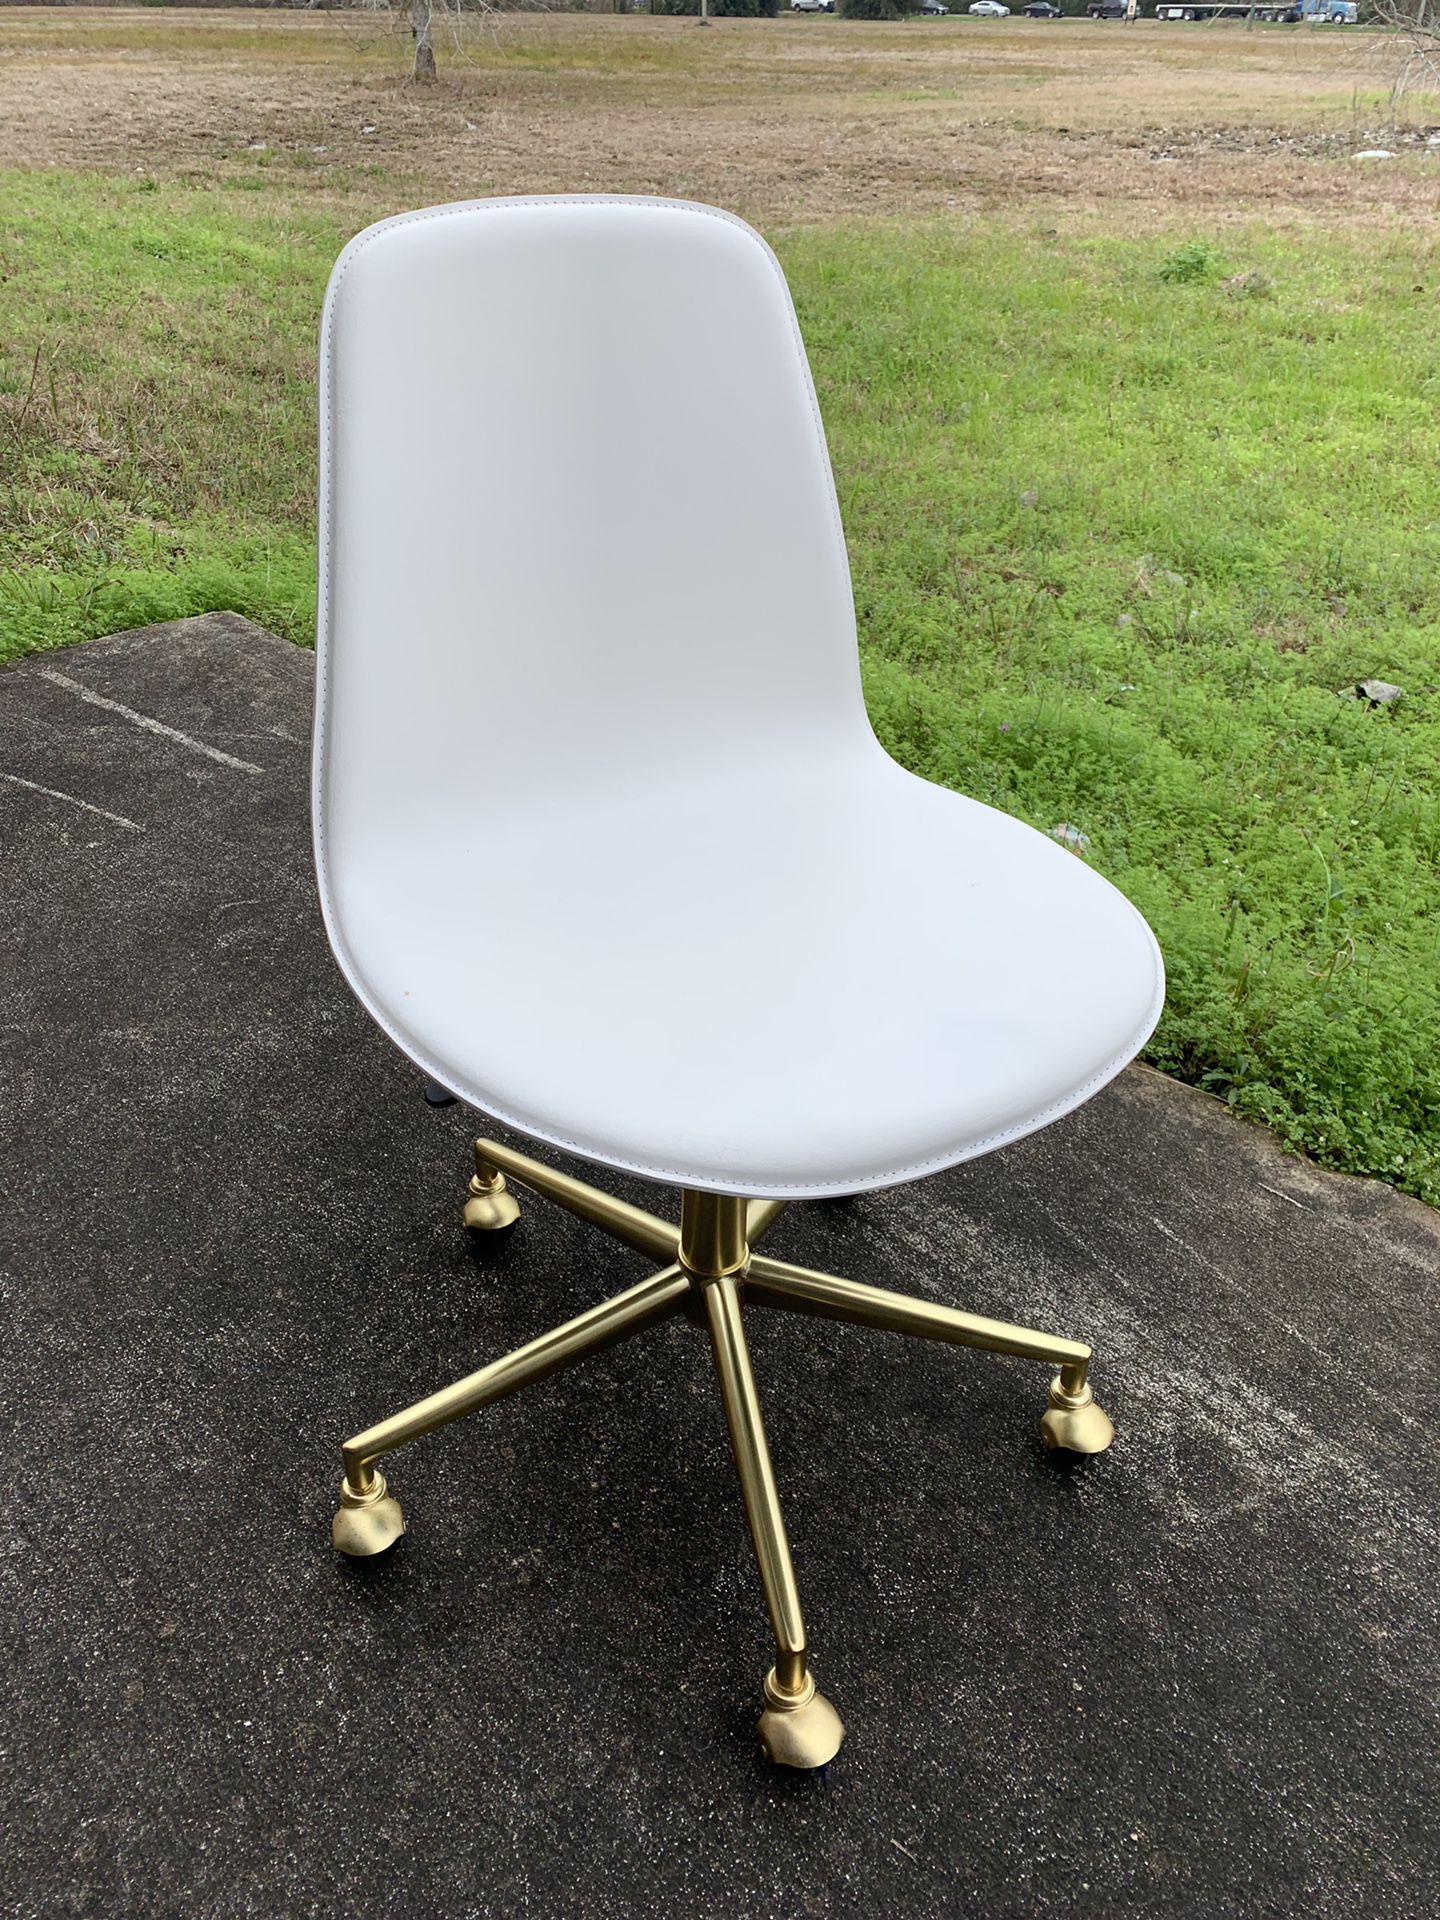 Beautiful white leather desk chairs with gold legs rolling